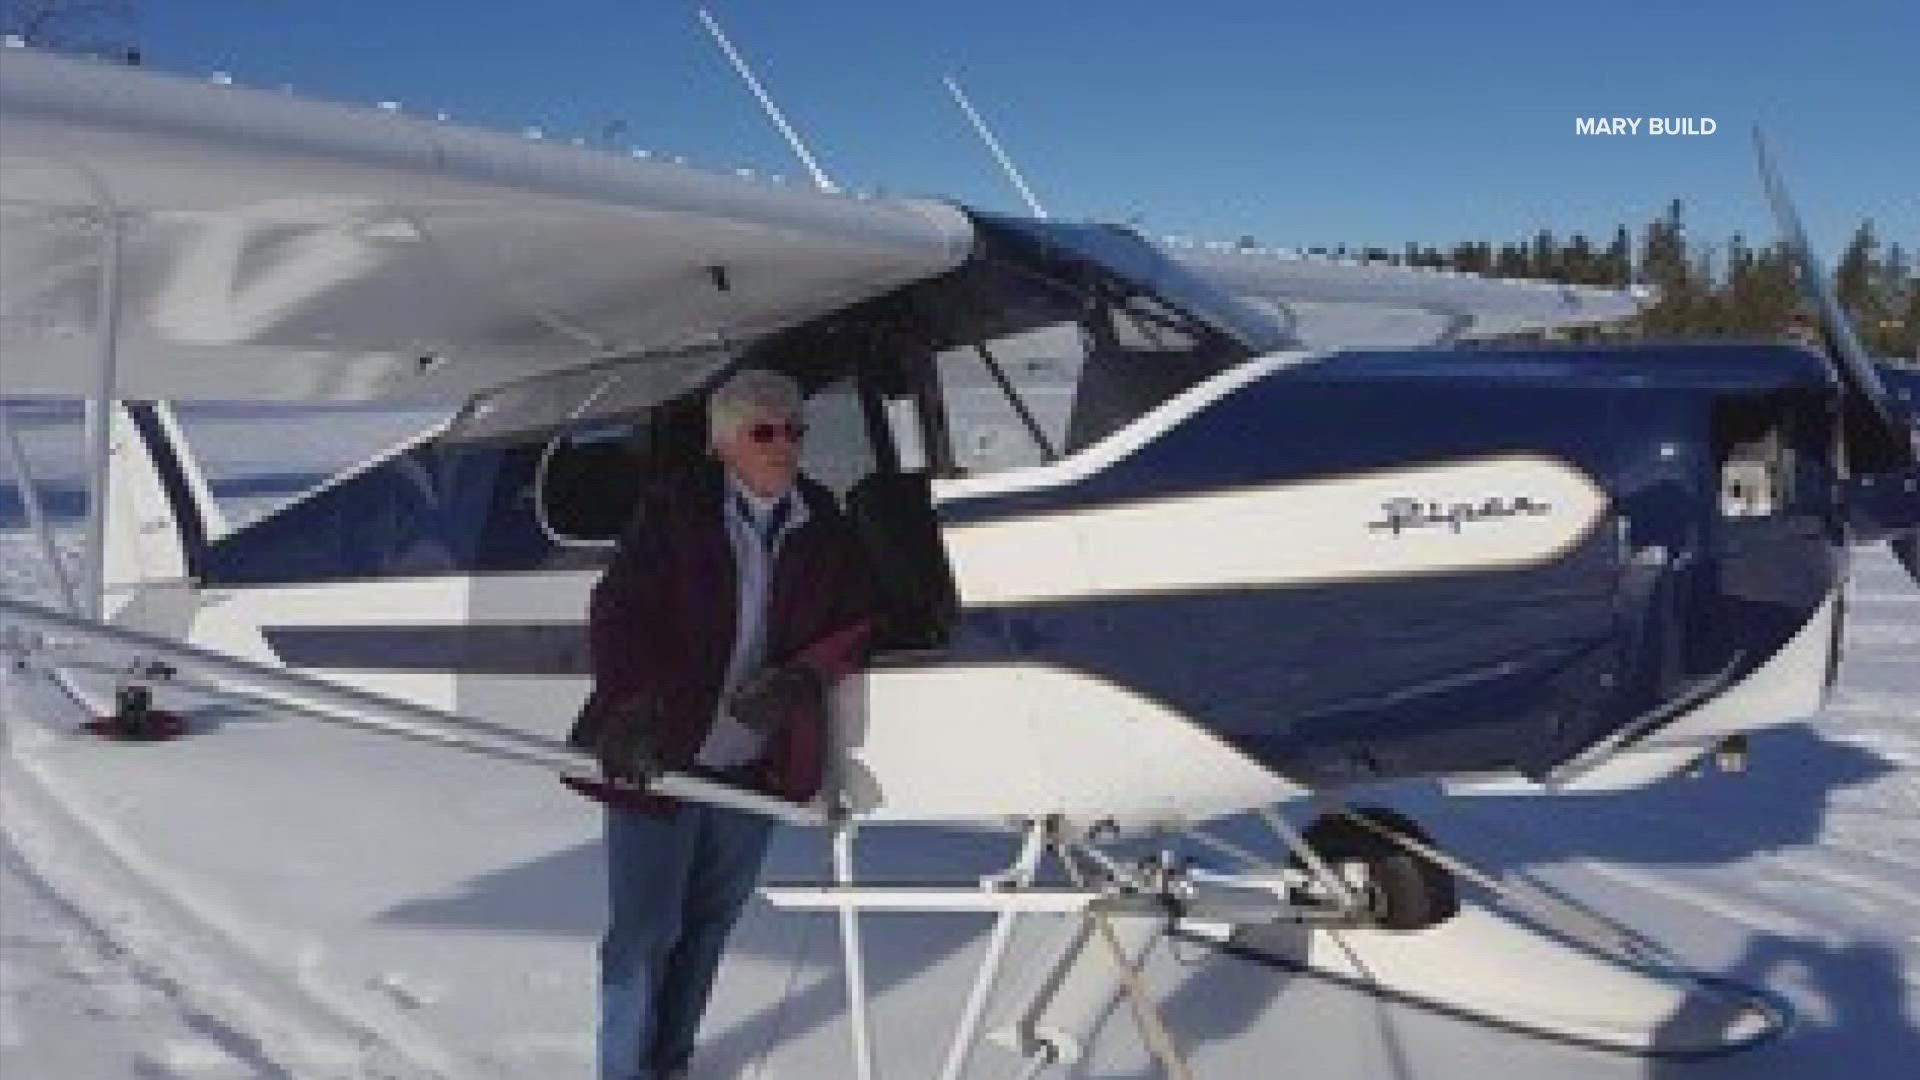 “Flying,” this Mainer says in a new memoir, “makes me feel whole.”